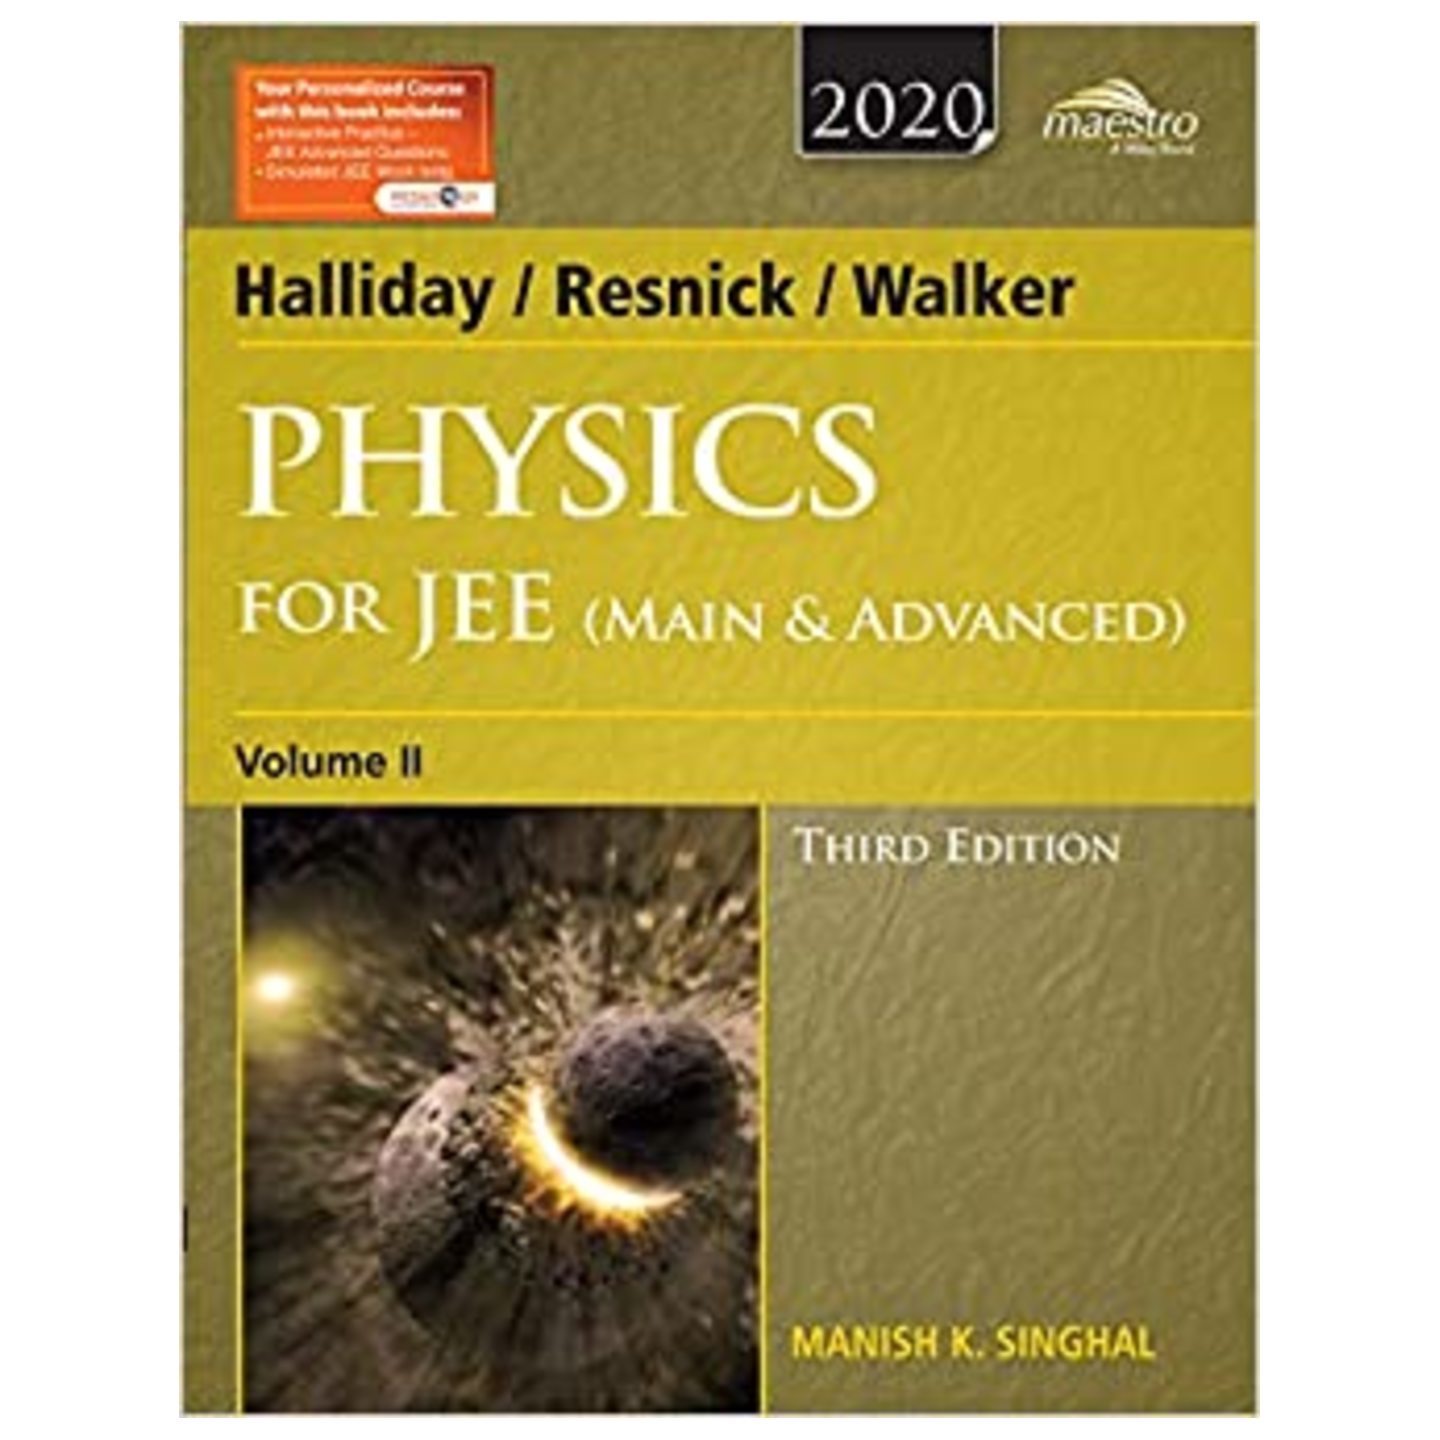 Wileys Halliday  Resnick  Walker Physics for JEE Main & Advanced, Vol II MANISH K SINGHAL